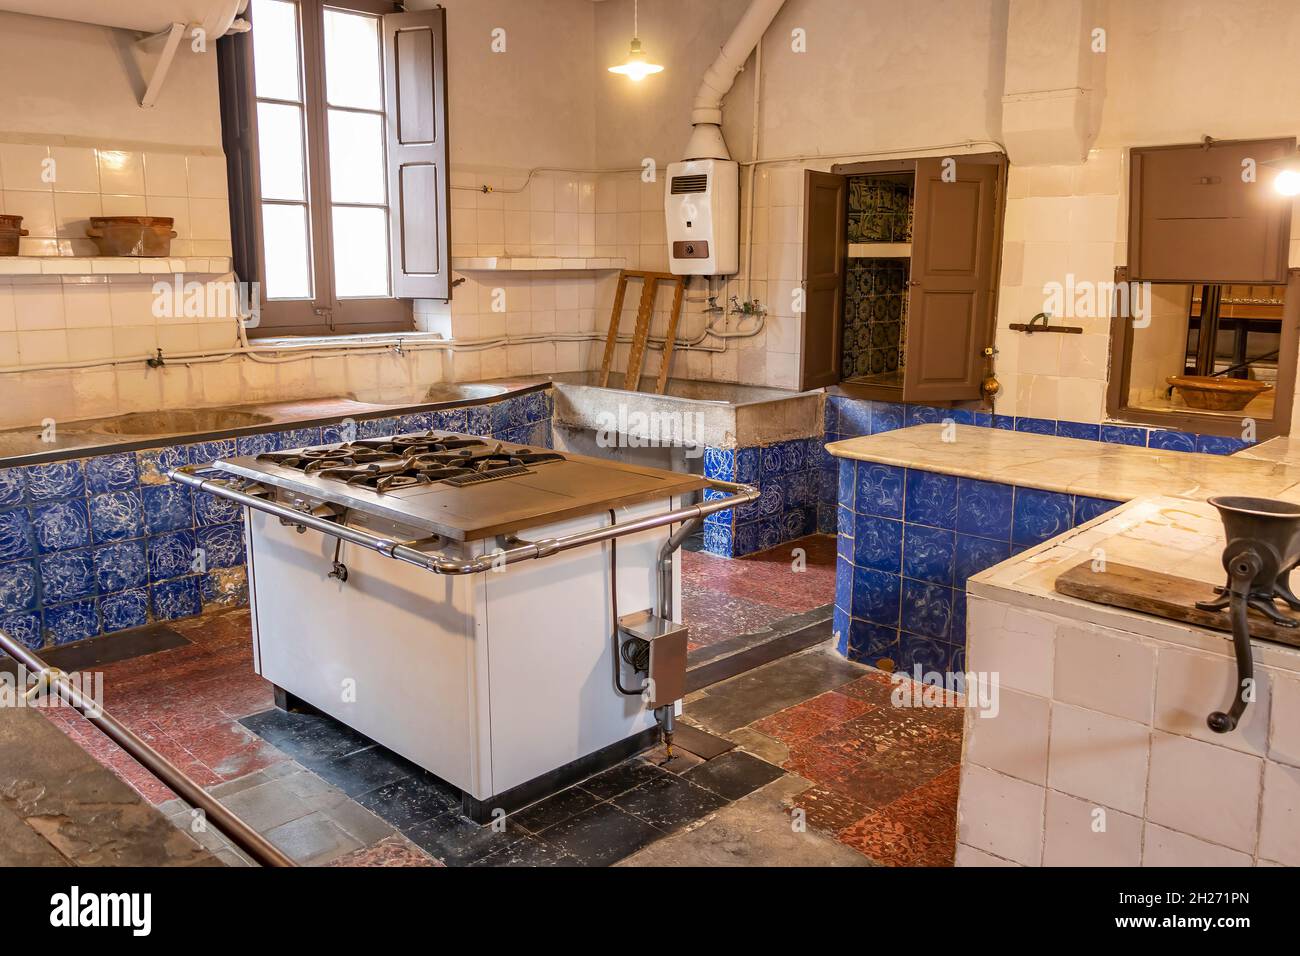 https://c8.alamy.com/comp/2H271PN/an-old-kitchen-from-the-early-20th-century-2H271PN.jpg